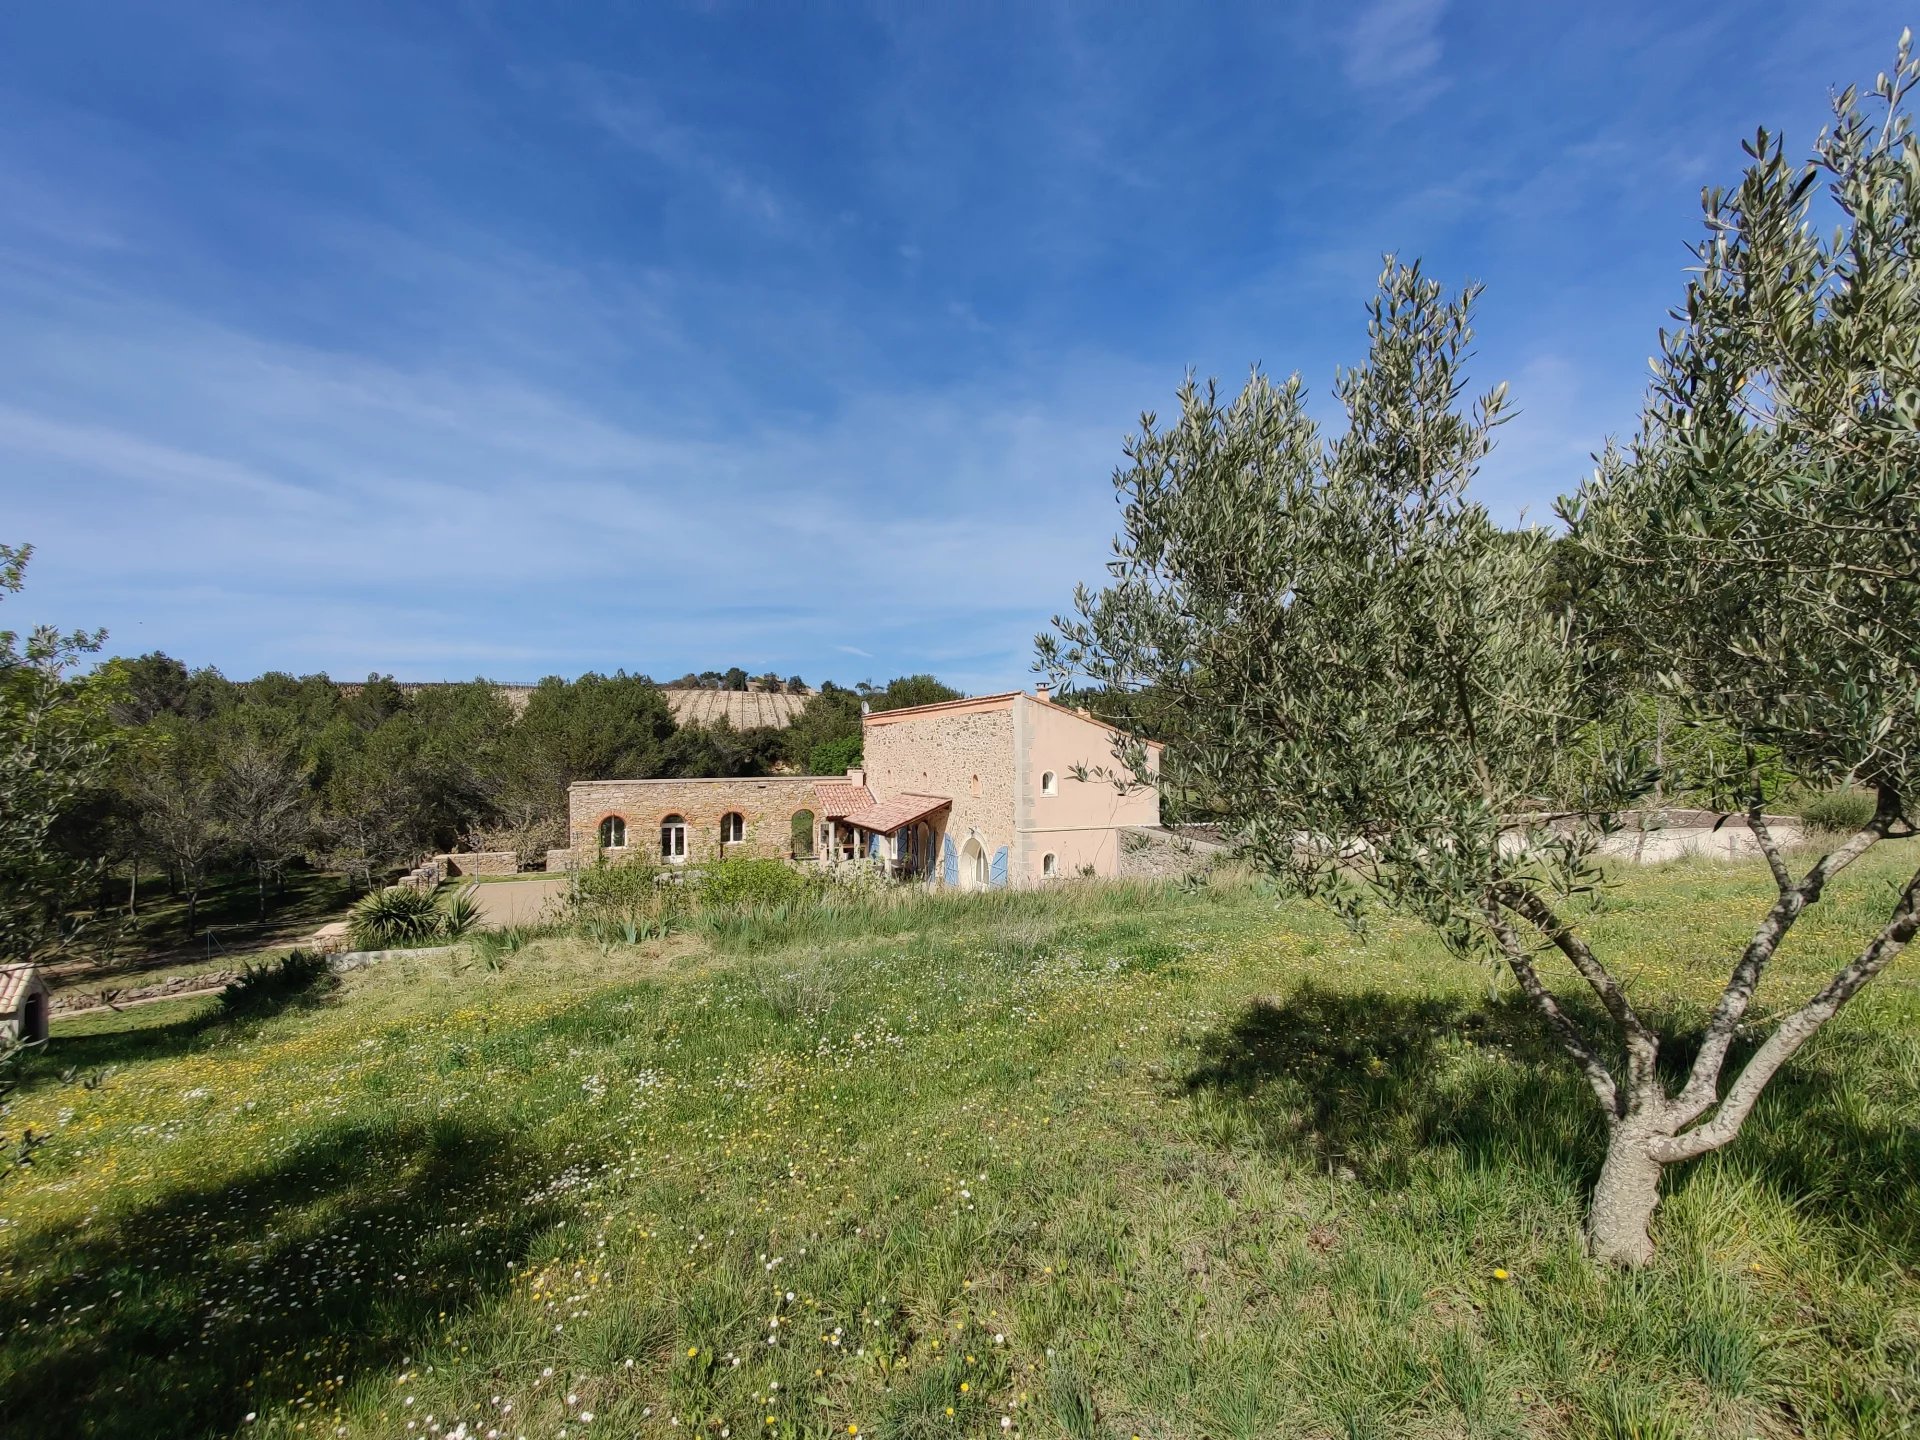 Historic renovated villa surrounded by olive trees and vineyards less than 1 hour from the Med sea